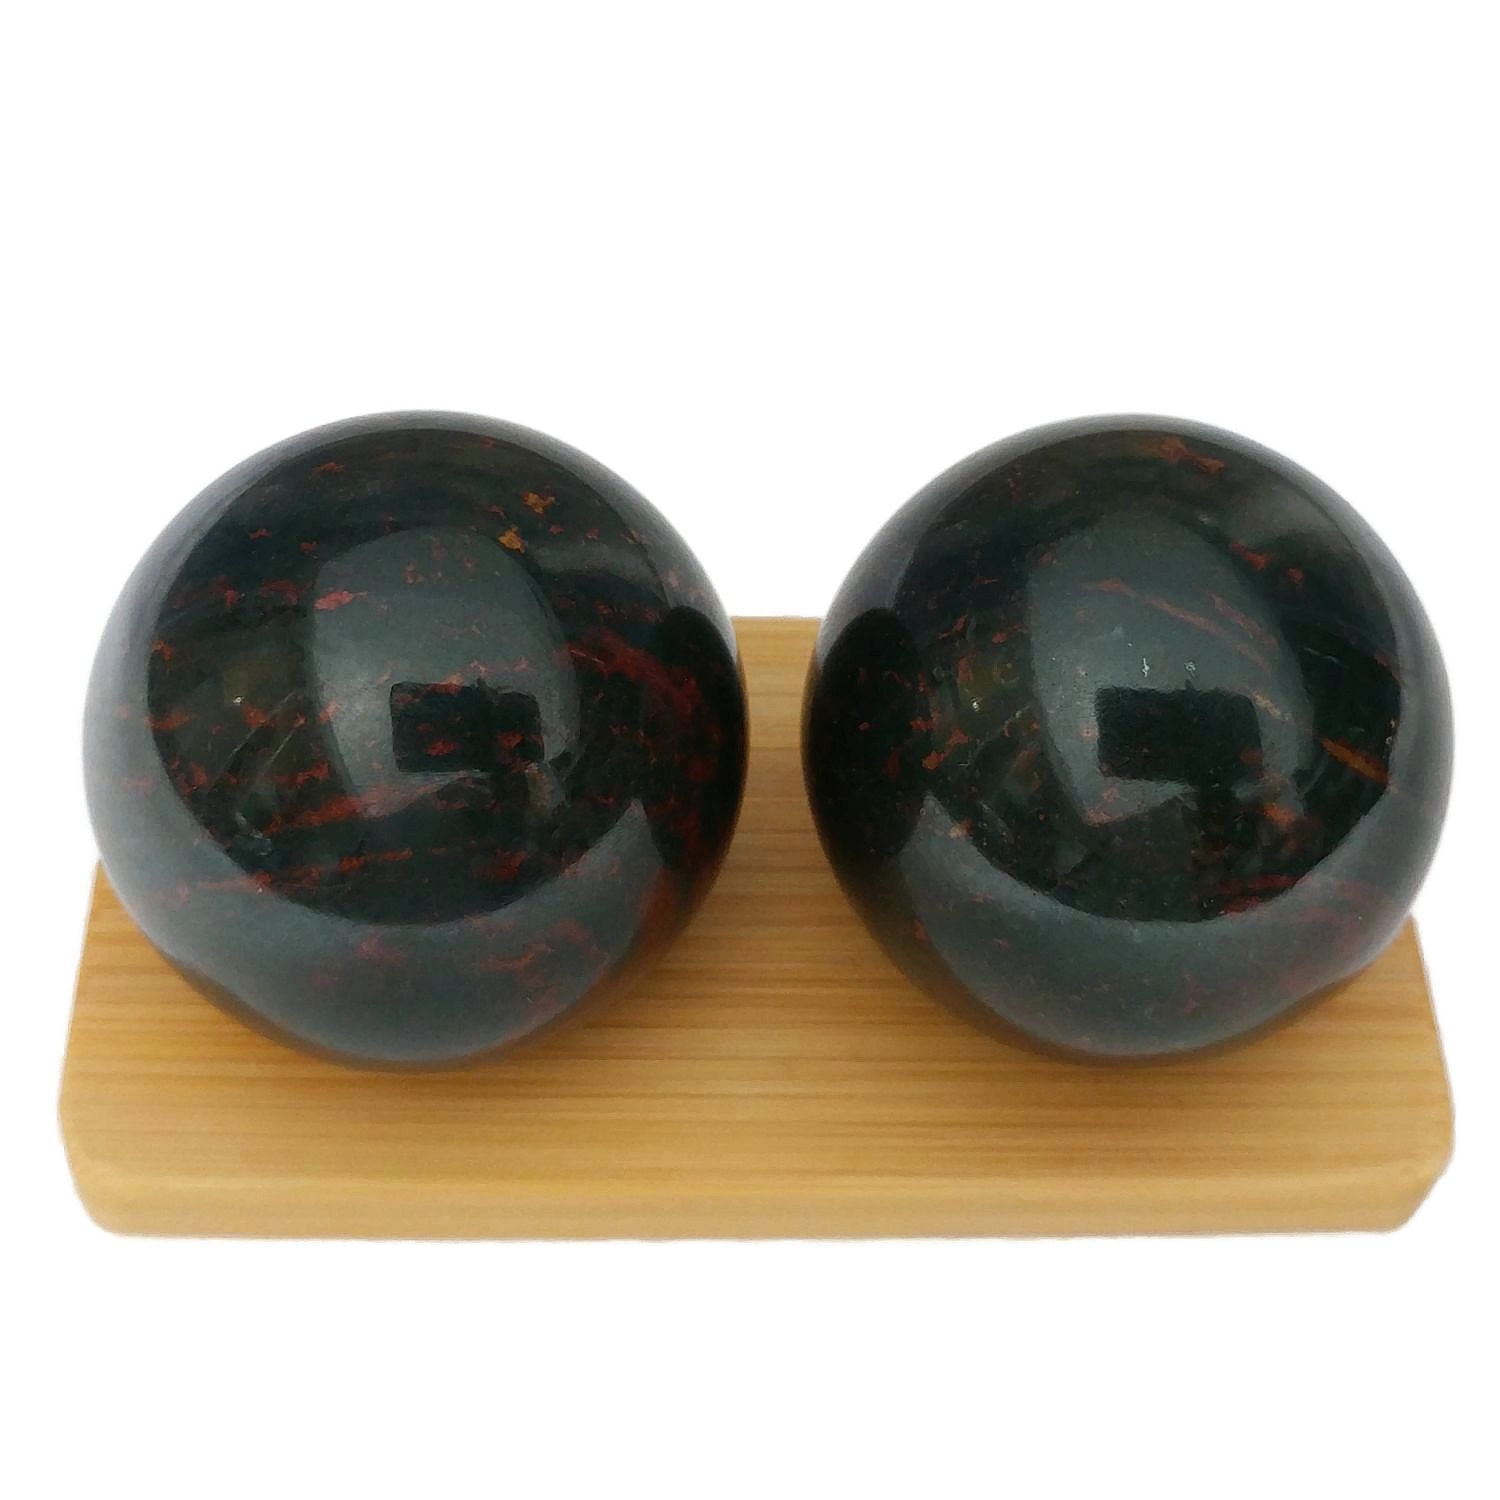 Bloodstone baoding balls on a bamboo stand